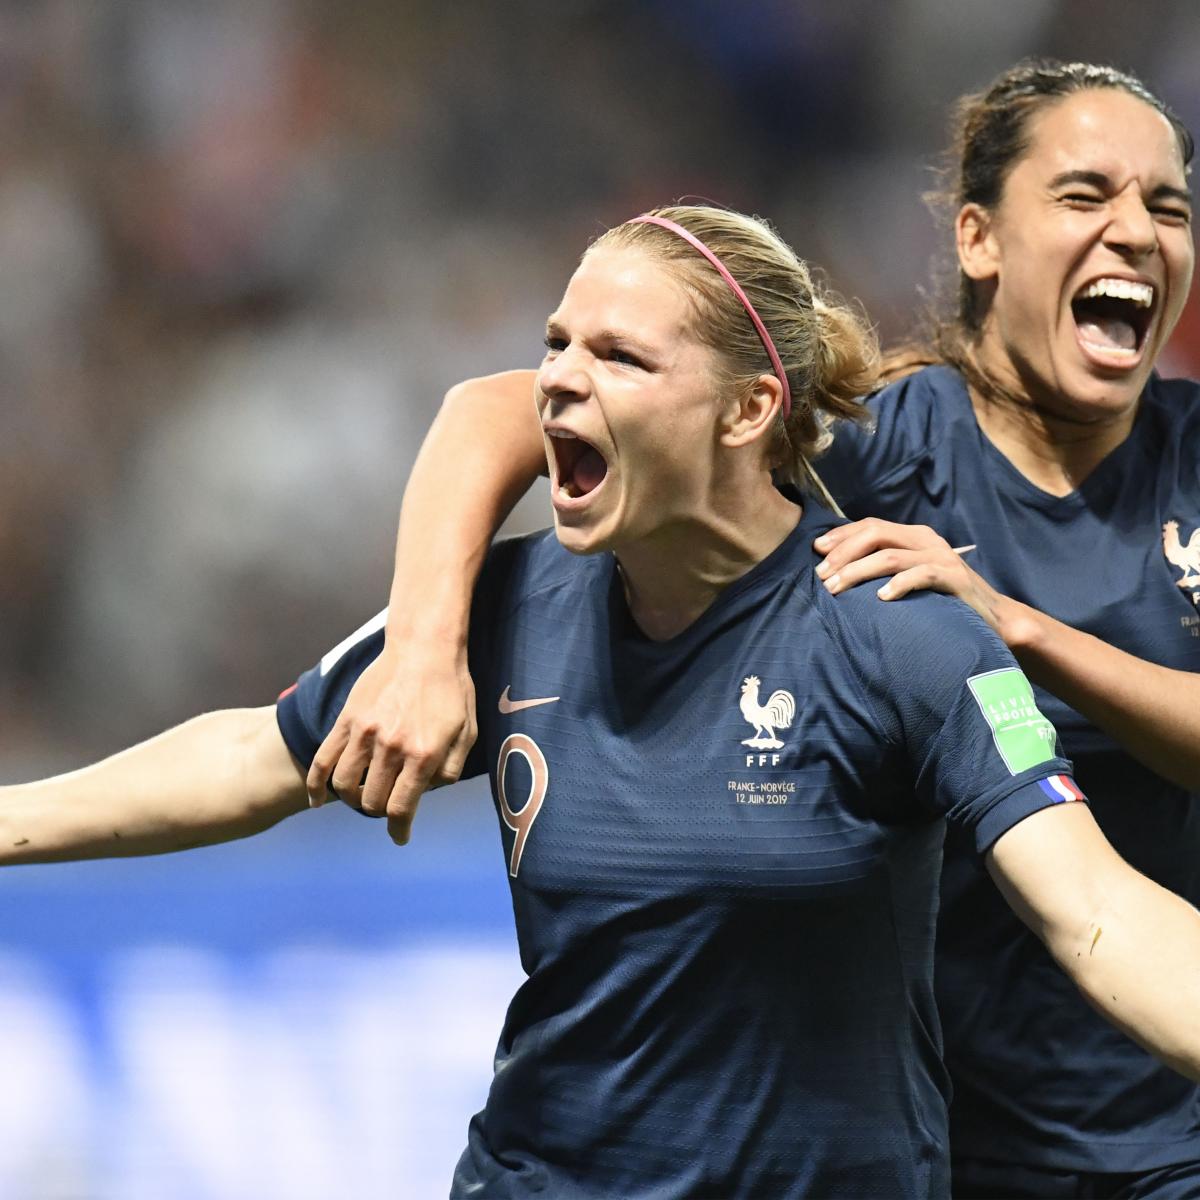 Women's World Cup Schedule 2019 Live Stream and Group Times for Monday